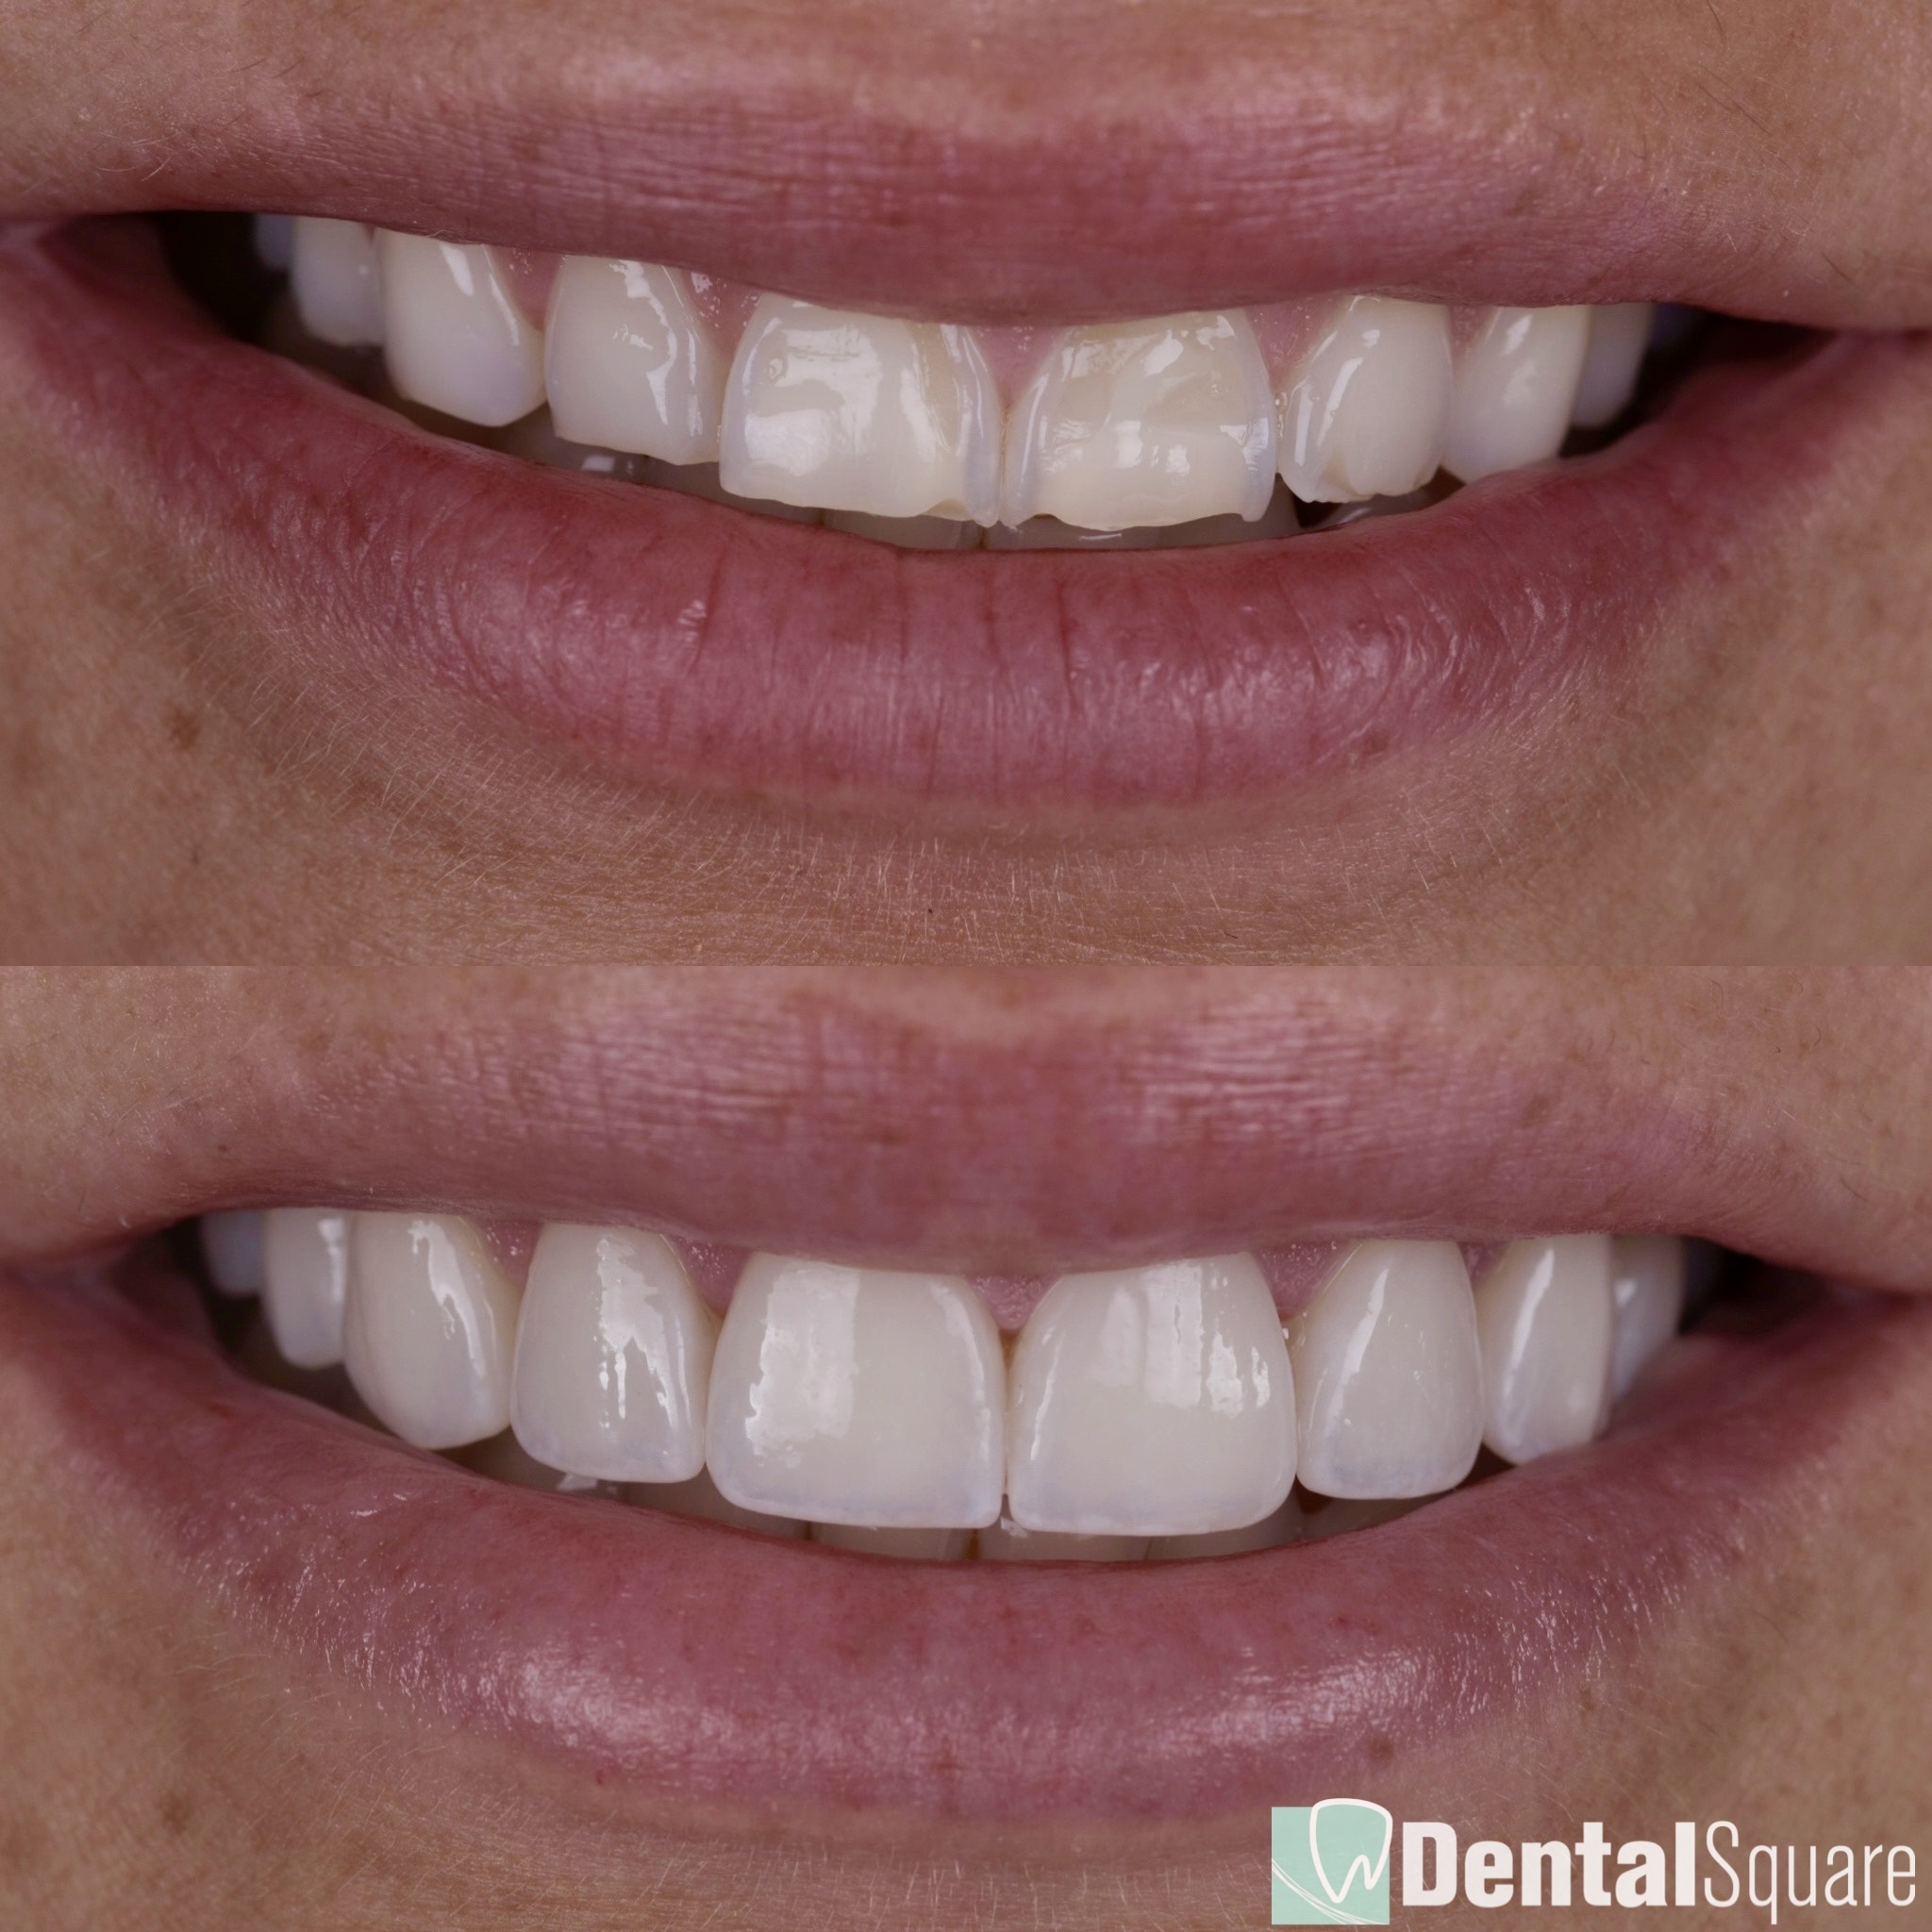 Treatment of severe wear and erosion with Veneers